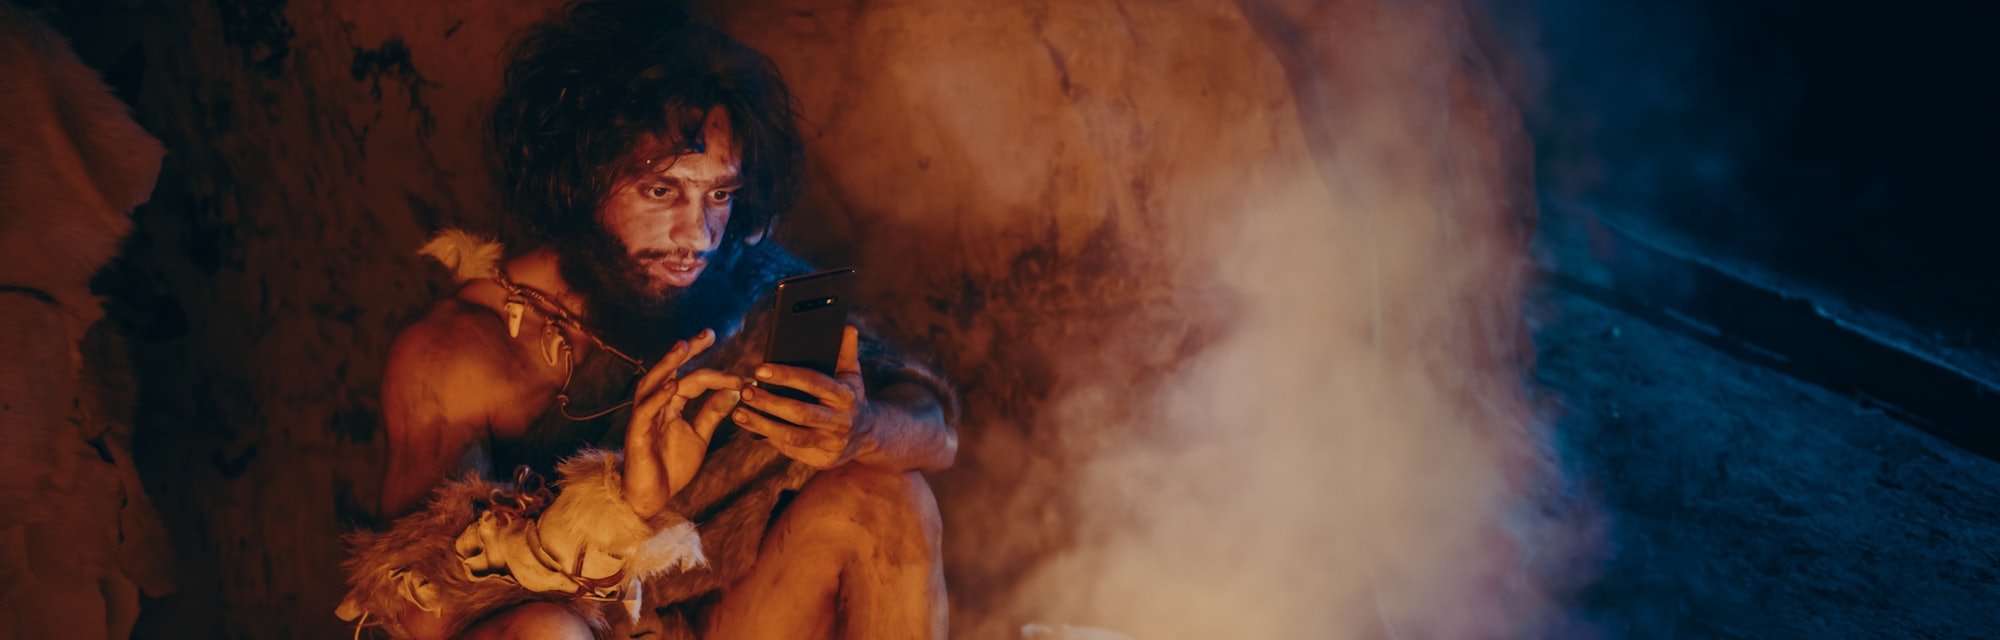 Tribe of Prehistoric, Primitive Hunter Gatherer Wearing Animal Skin Uses Smartphone in a Cave at Nig...